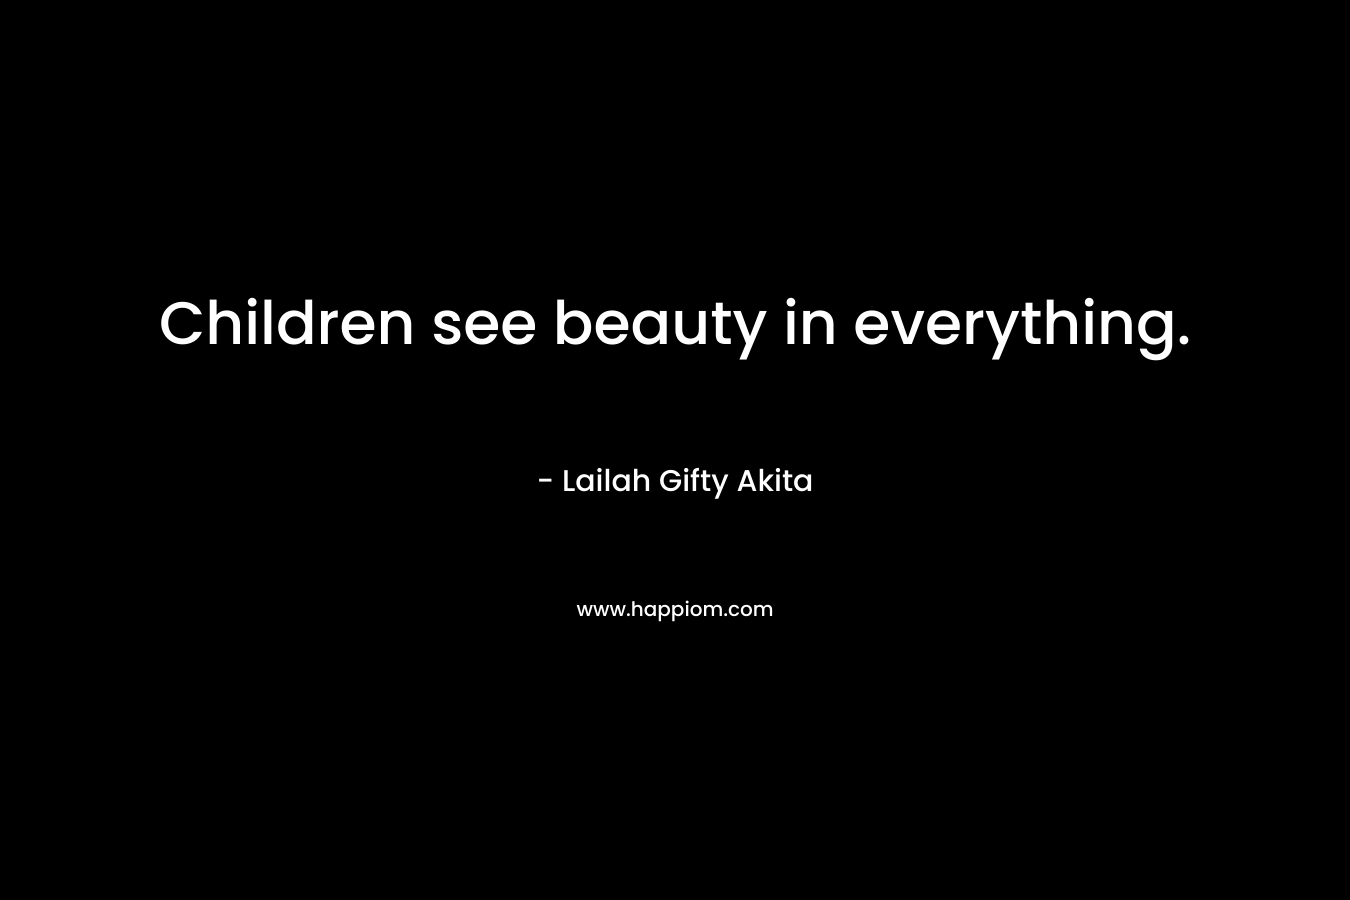 Children see beauty in everything.